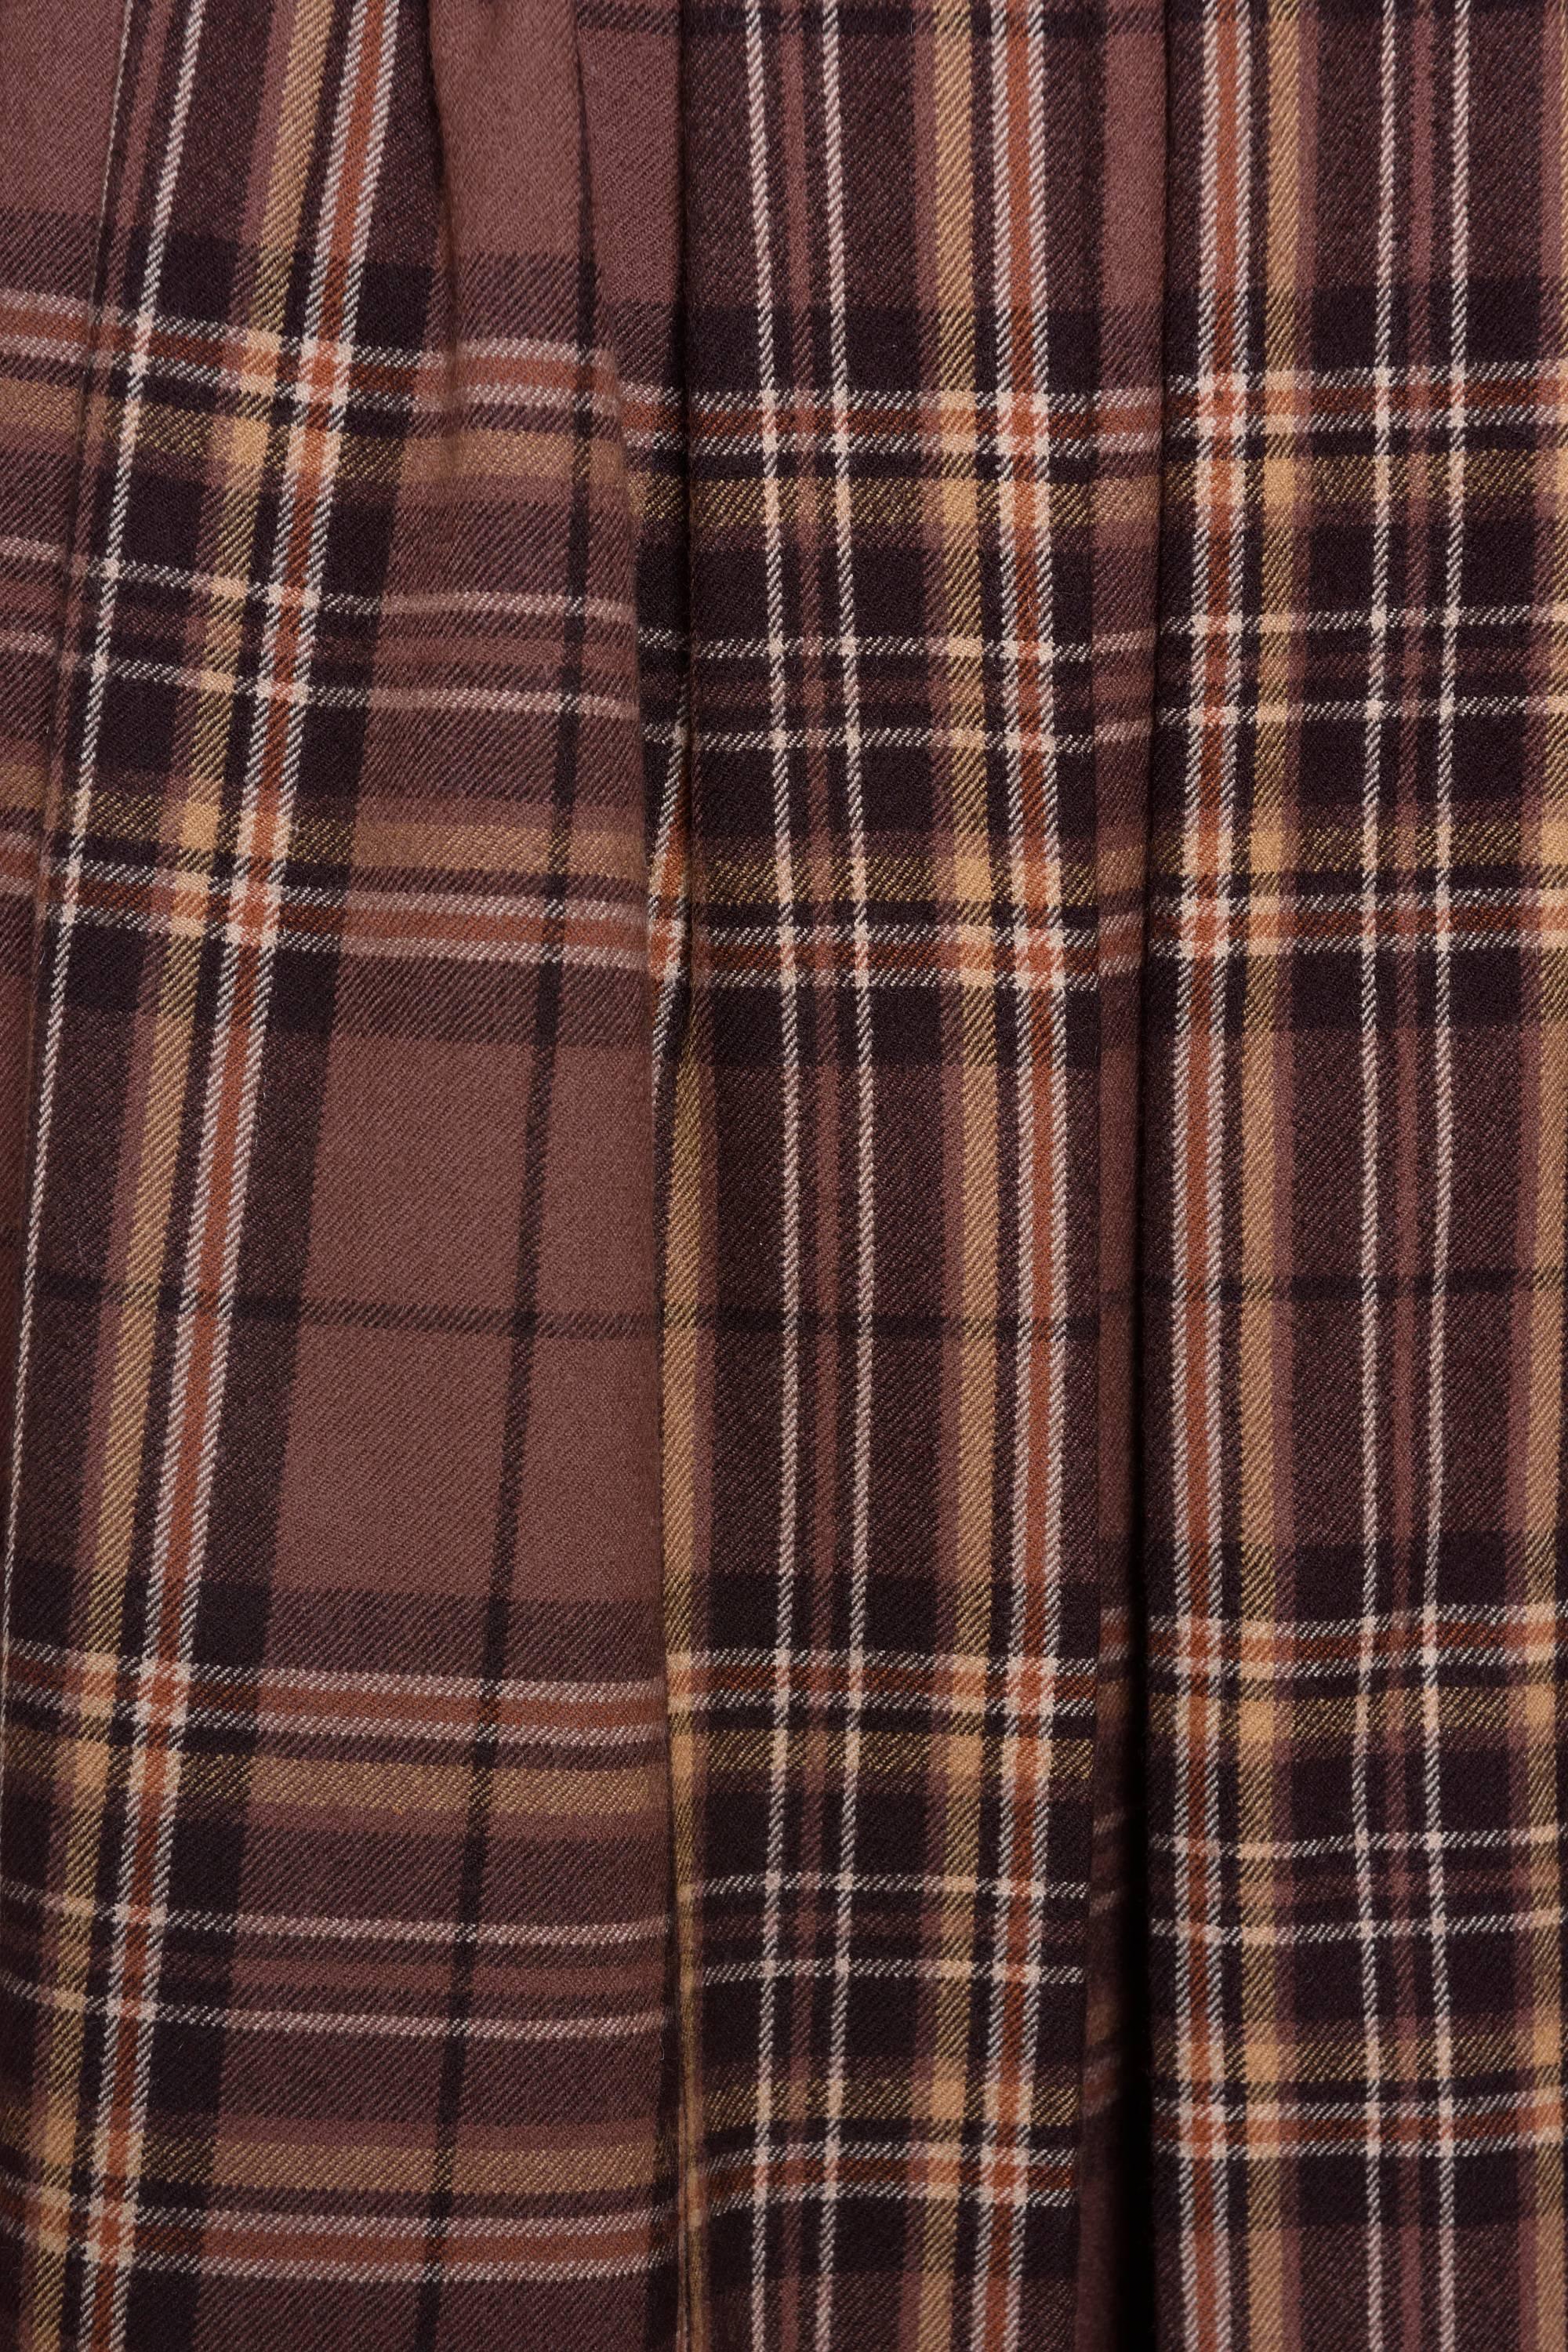 1980s YVES SAINT LAURENT Rive Gauche Tartan and Velvet Brown Suit Skirt  In Excellent Condition For Sale In Milan, Italy